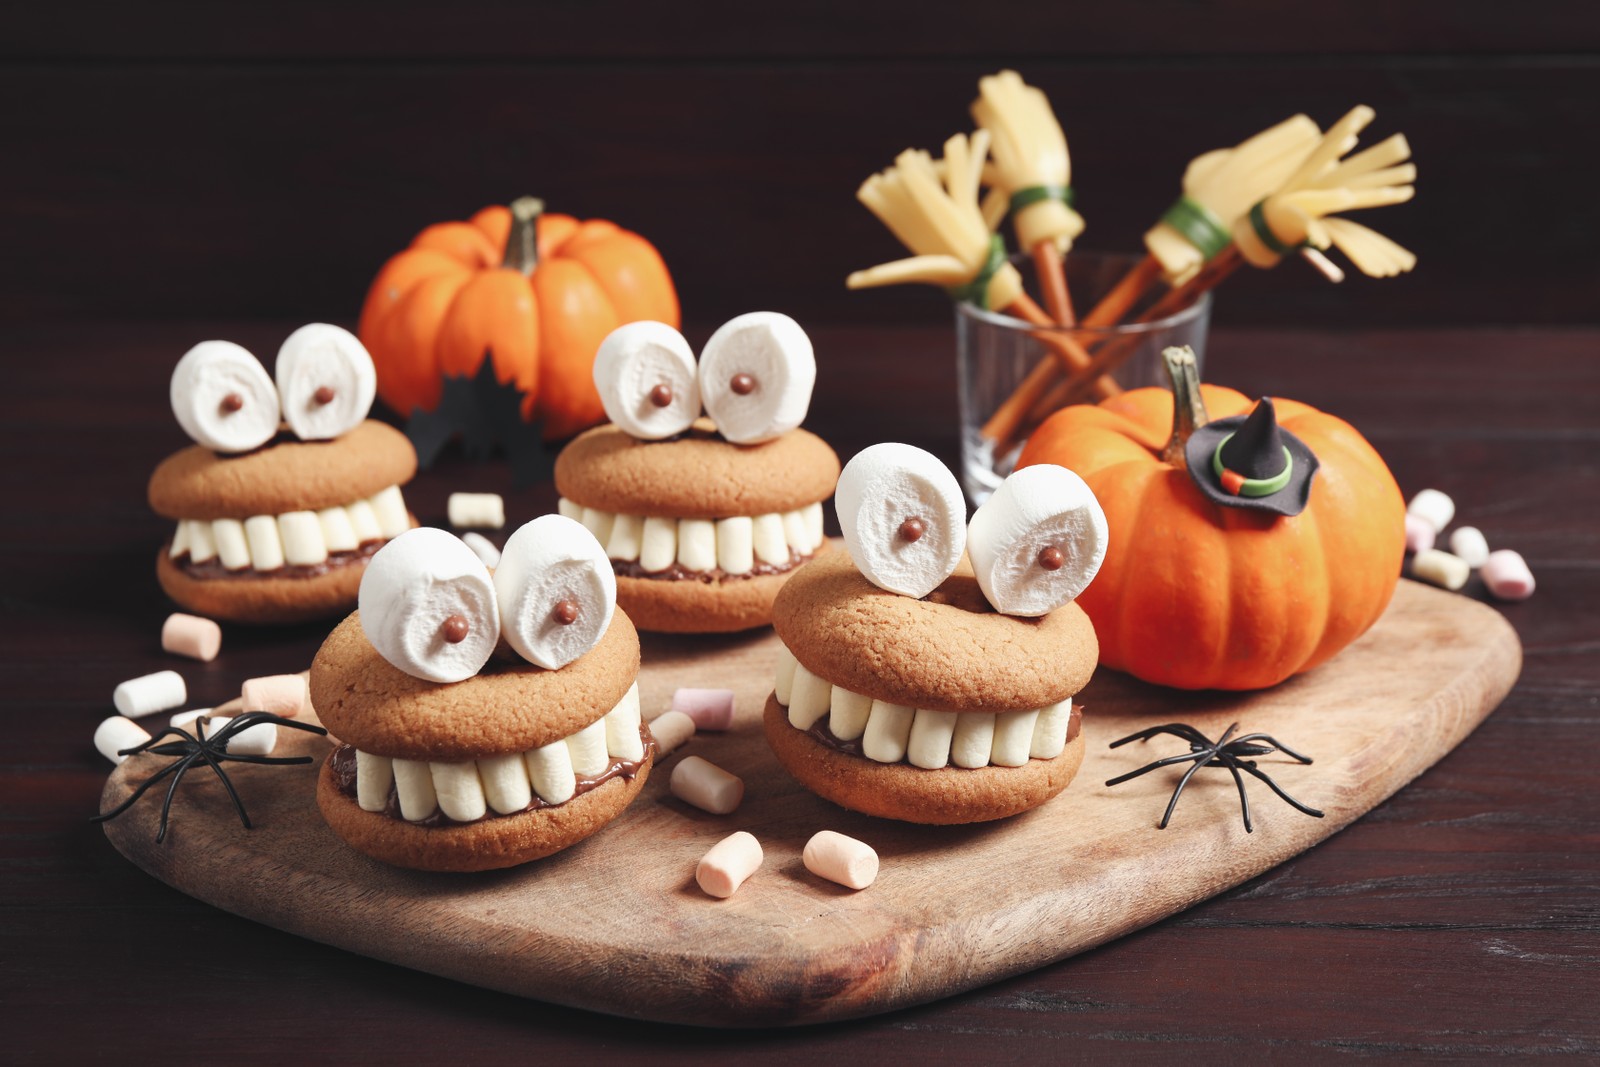 Photo of delicious Halloween themed desserts on wooden table